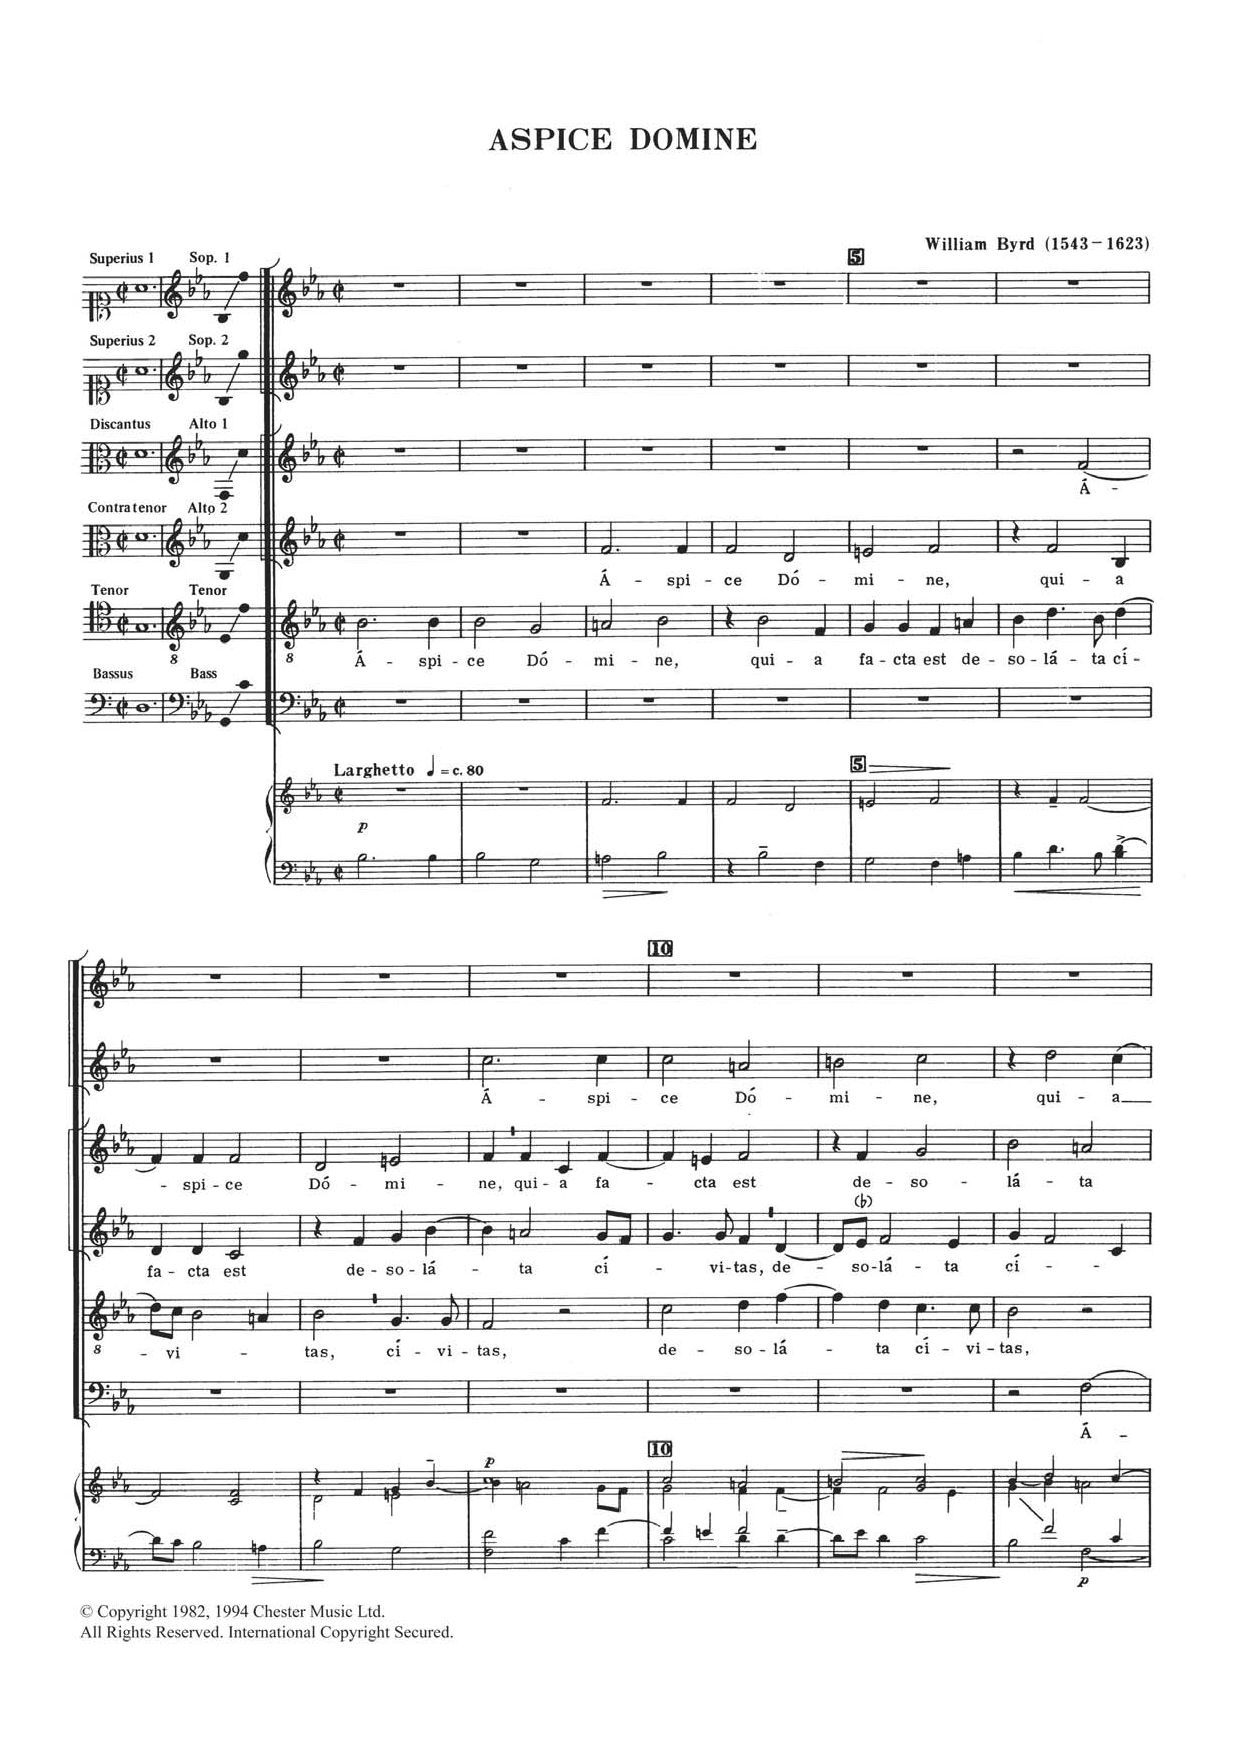 William Byrd Aspice Domine sheet music notes and chords. Download Printable PDF.